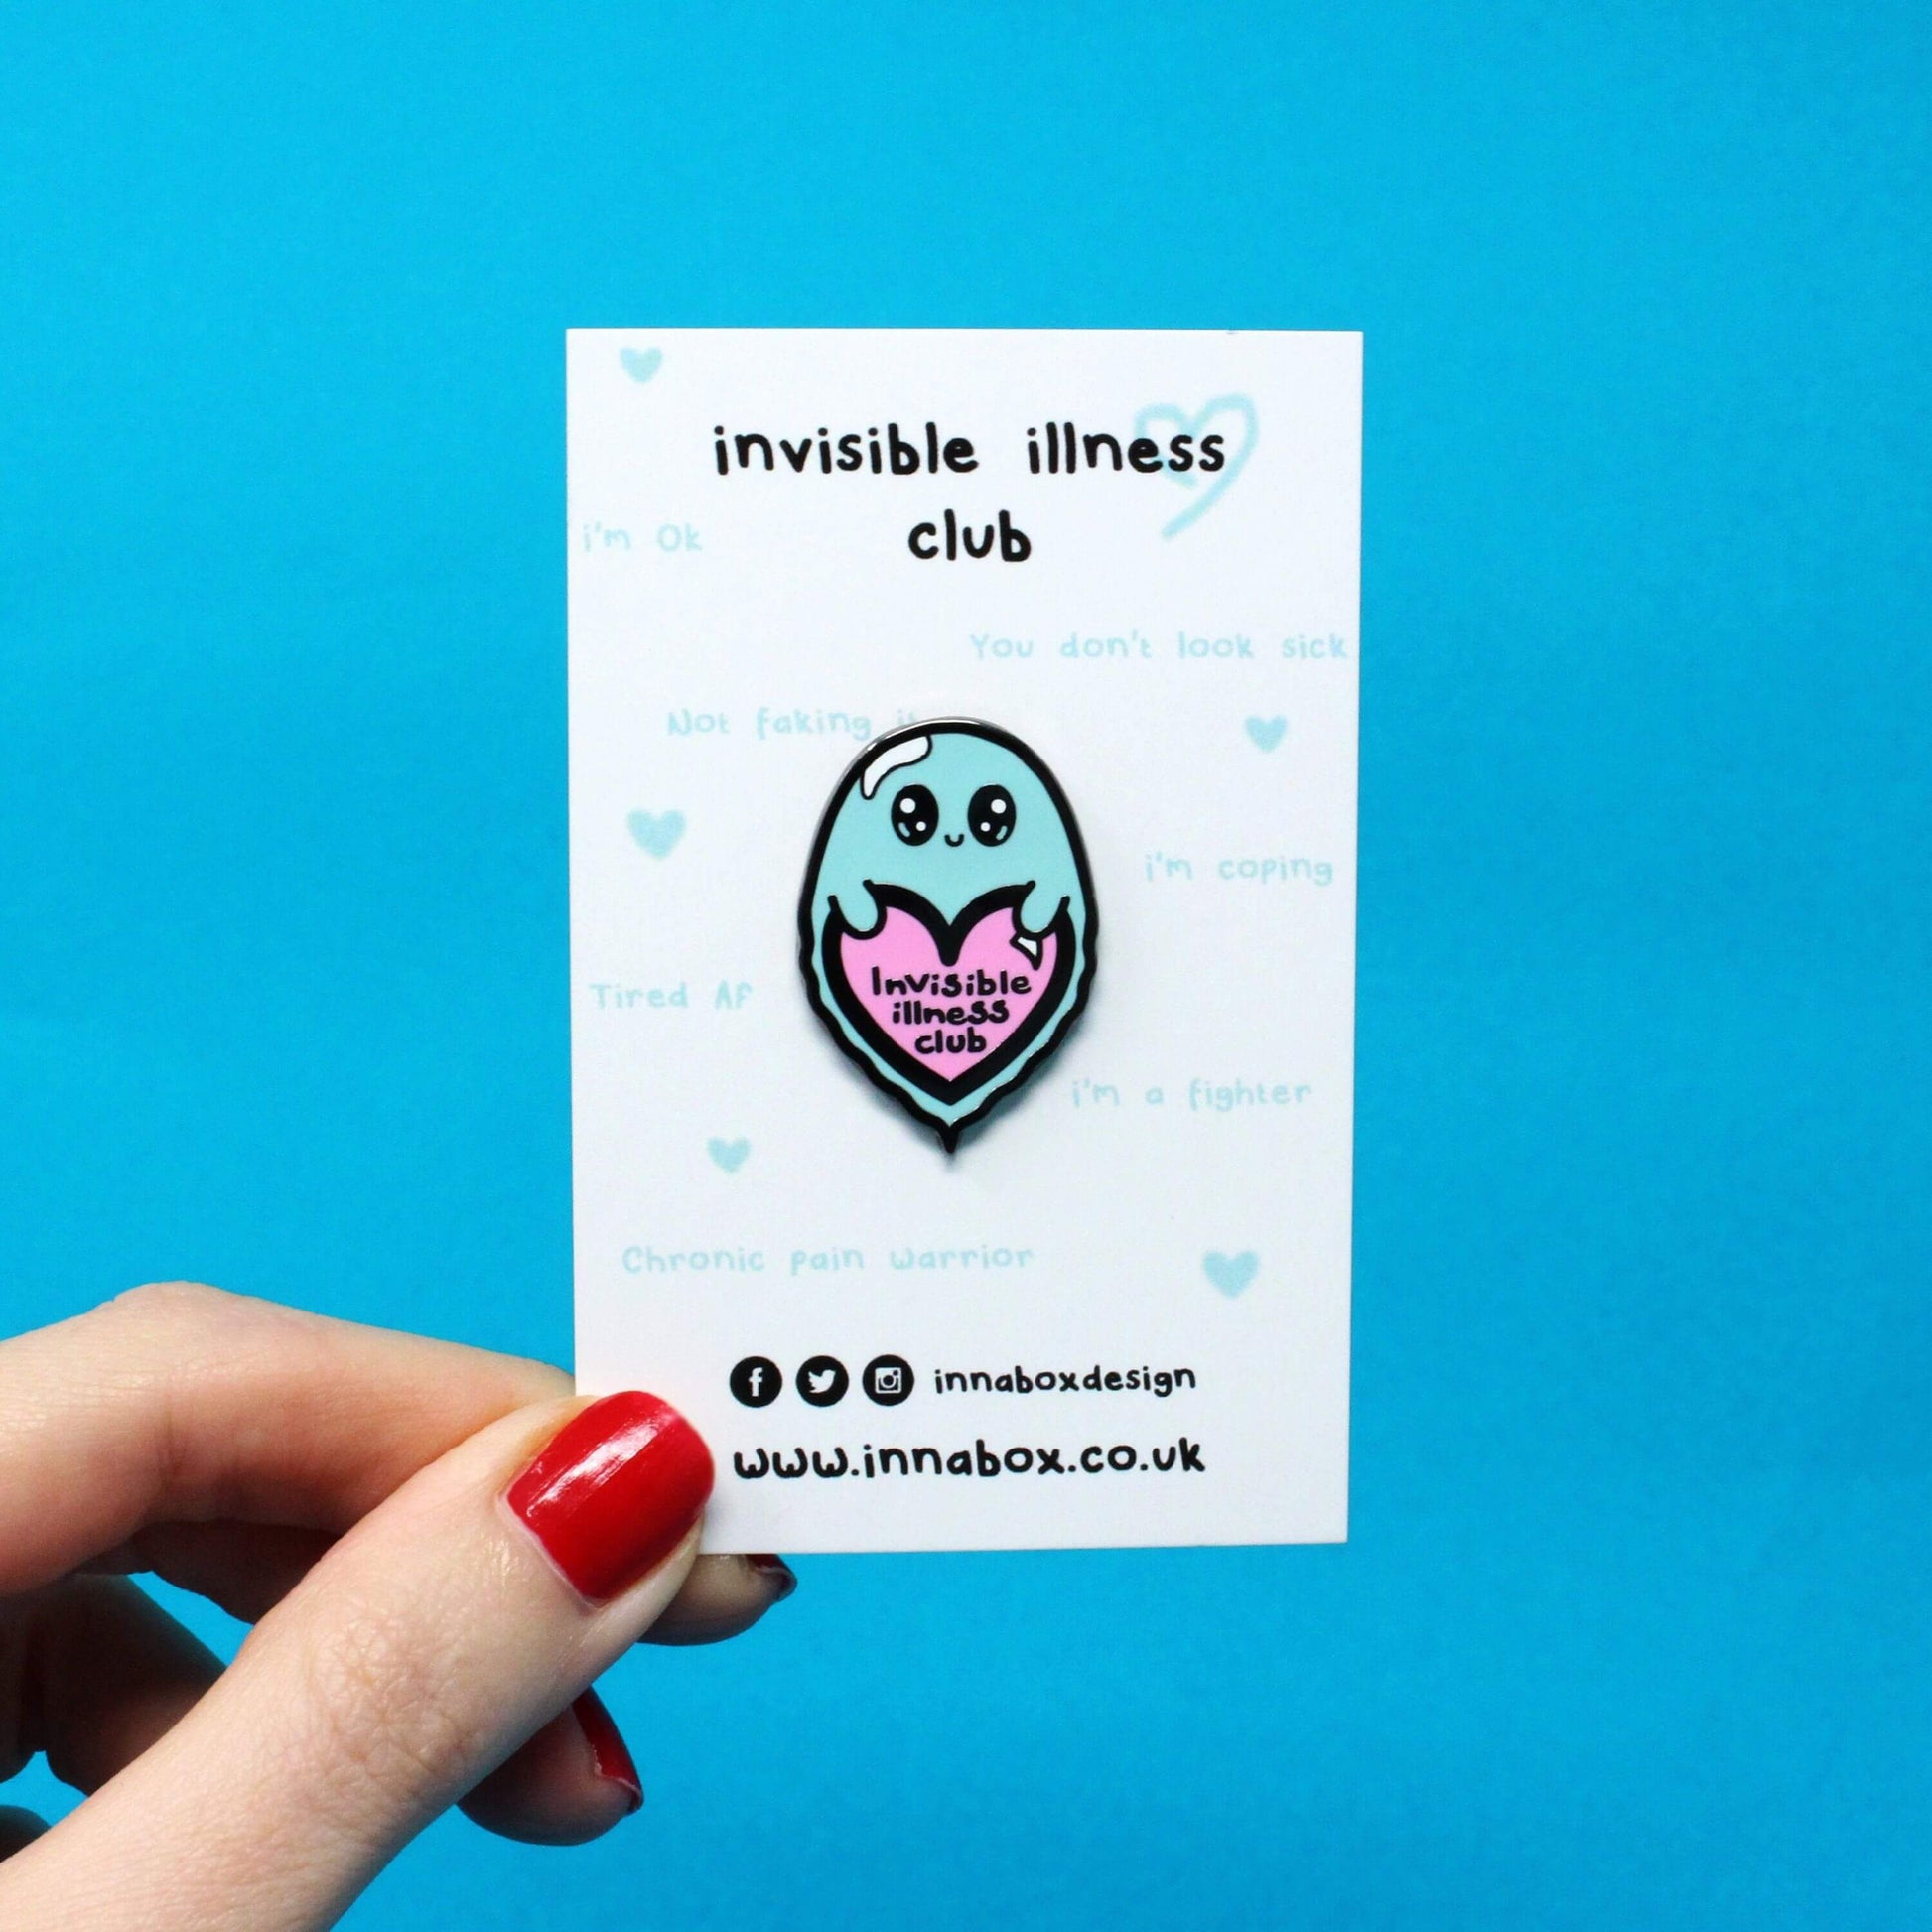 Invisible Illness Club Enamel Pin on white backing card with light blue quotes written on it in front of a red background. The enamel pin is of a cute smiling ghost holding a pink heart with text saying invisible illness club. The enamel pin is designed to raise awareness for hidden and chronic illnesses